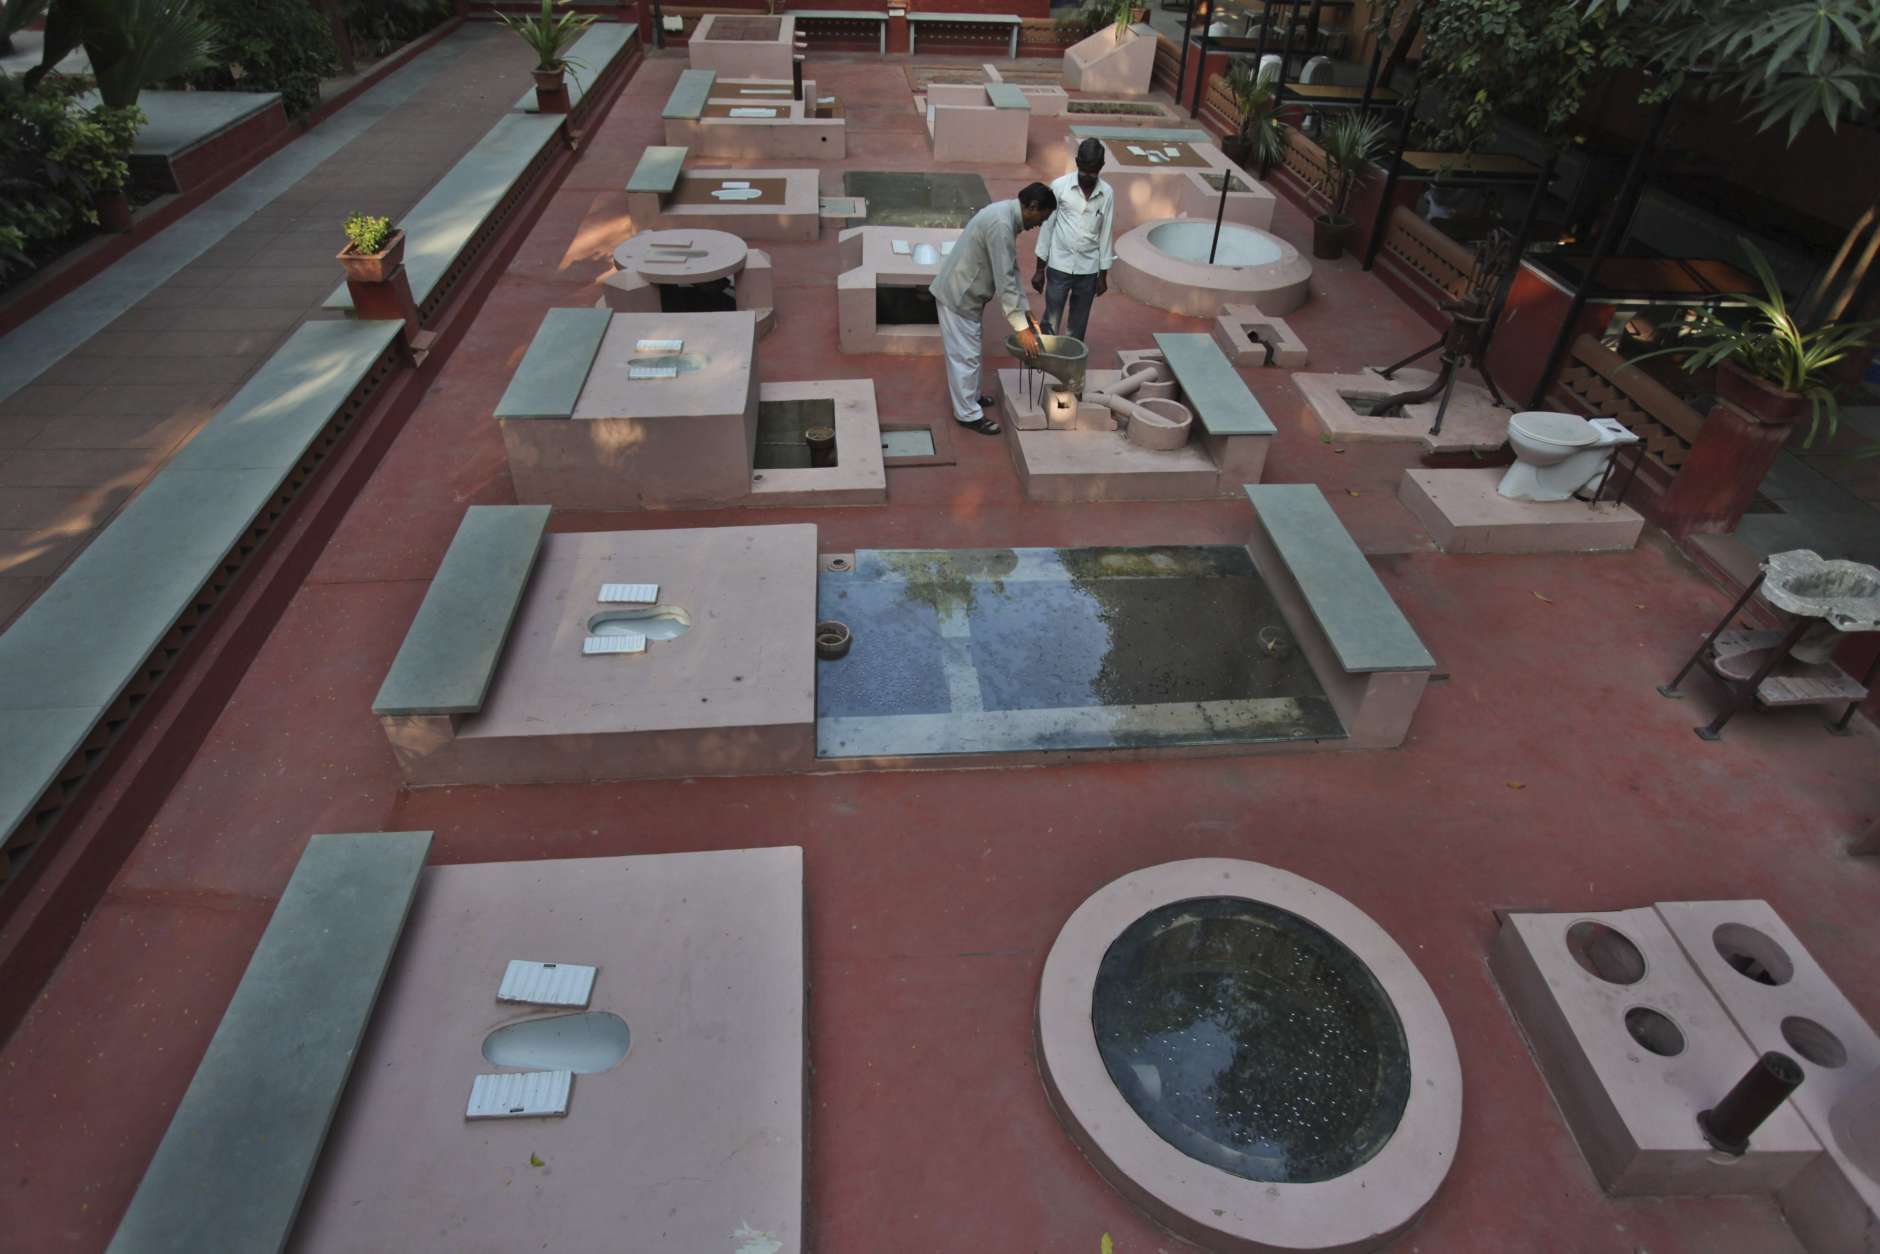 Indians look at the low cost models of toilets that are on permanent display on the premises of the Environmental Sanitation Institute (ESI) on World Toilet Day in Ahmadabad, India, Wednesday, Nov. 19, 2014. India is considered to have the world's worst sanitation record despite spending some $3 billion since 1986 on sanitation programs, according to government figures. Building toilets in rural India, where hundreds of millions are still defecating outdoors, will not be enough to improve public health, according to a study published last month. (AP Photo/Ajit Solanki)